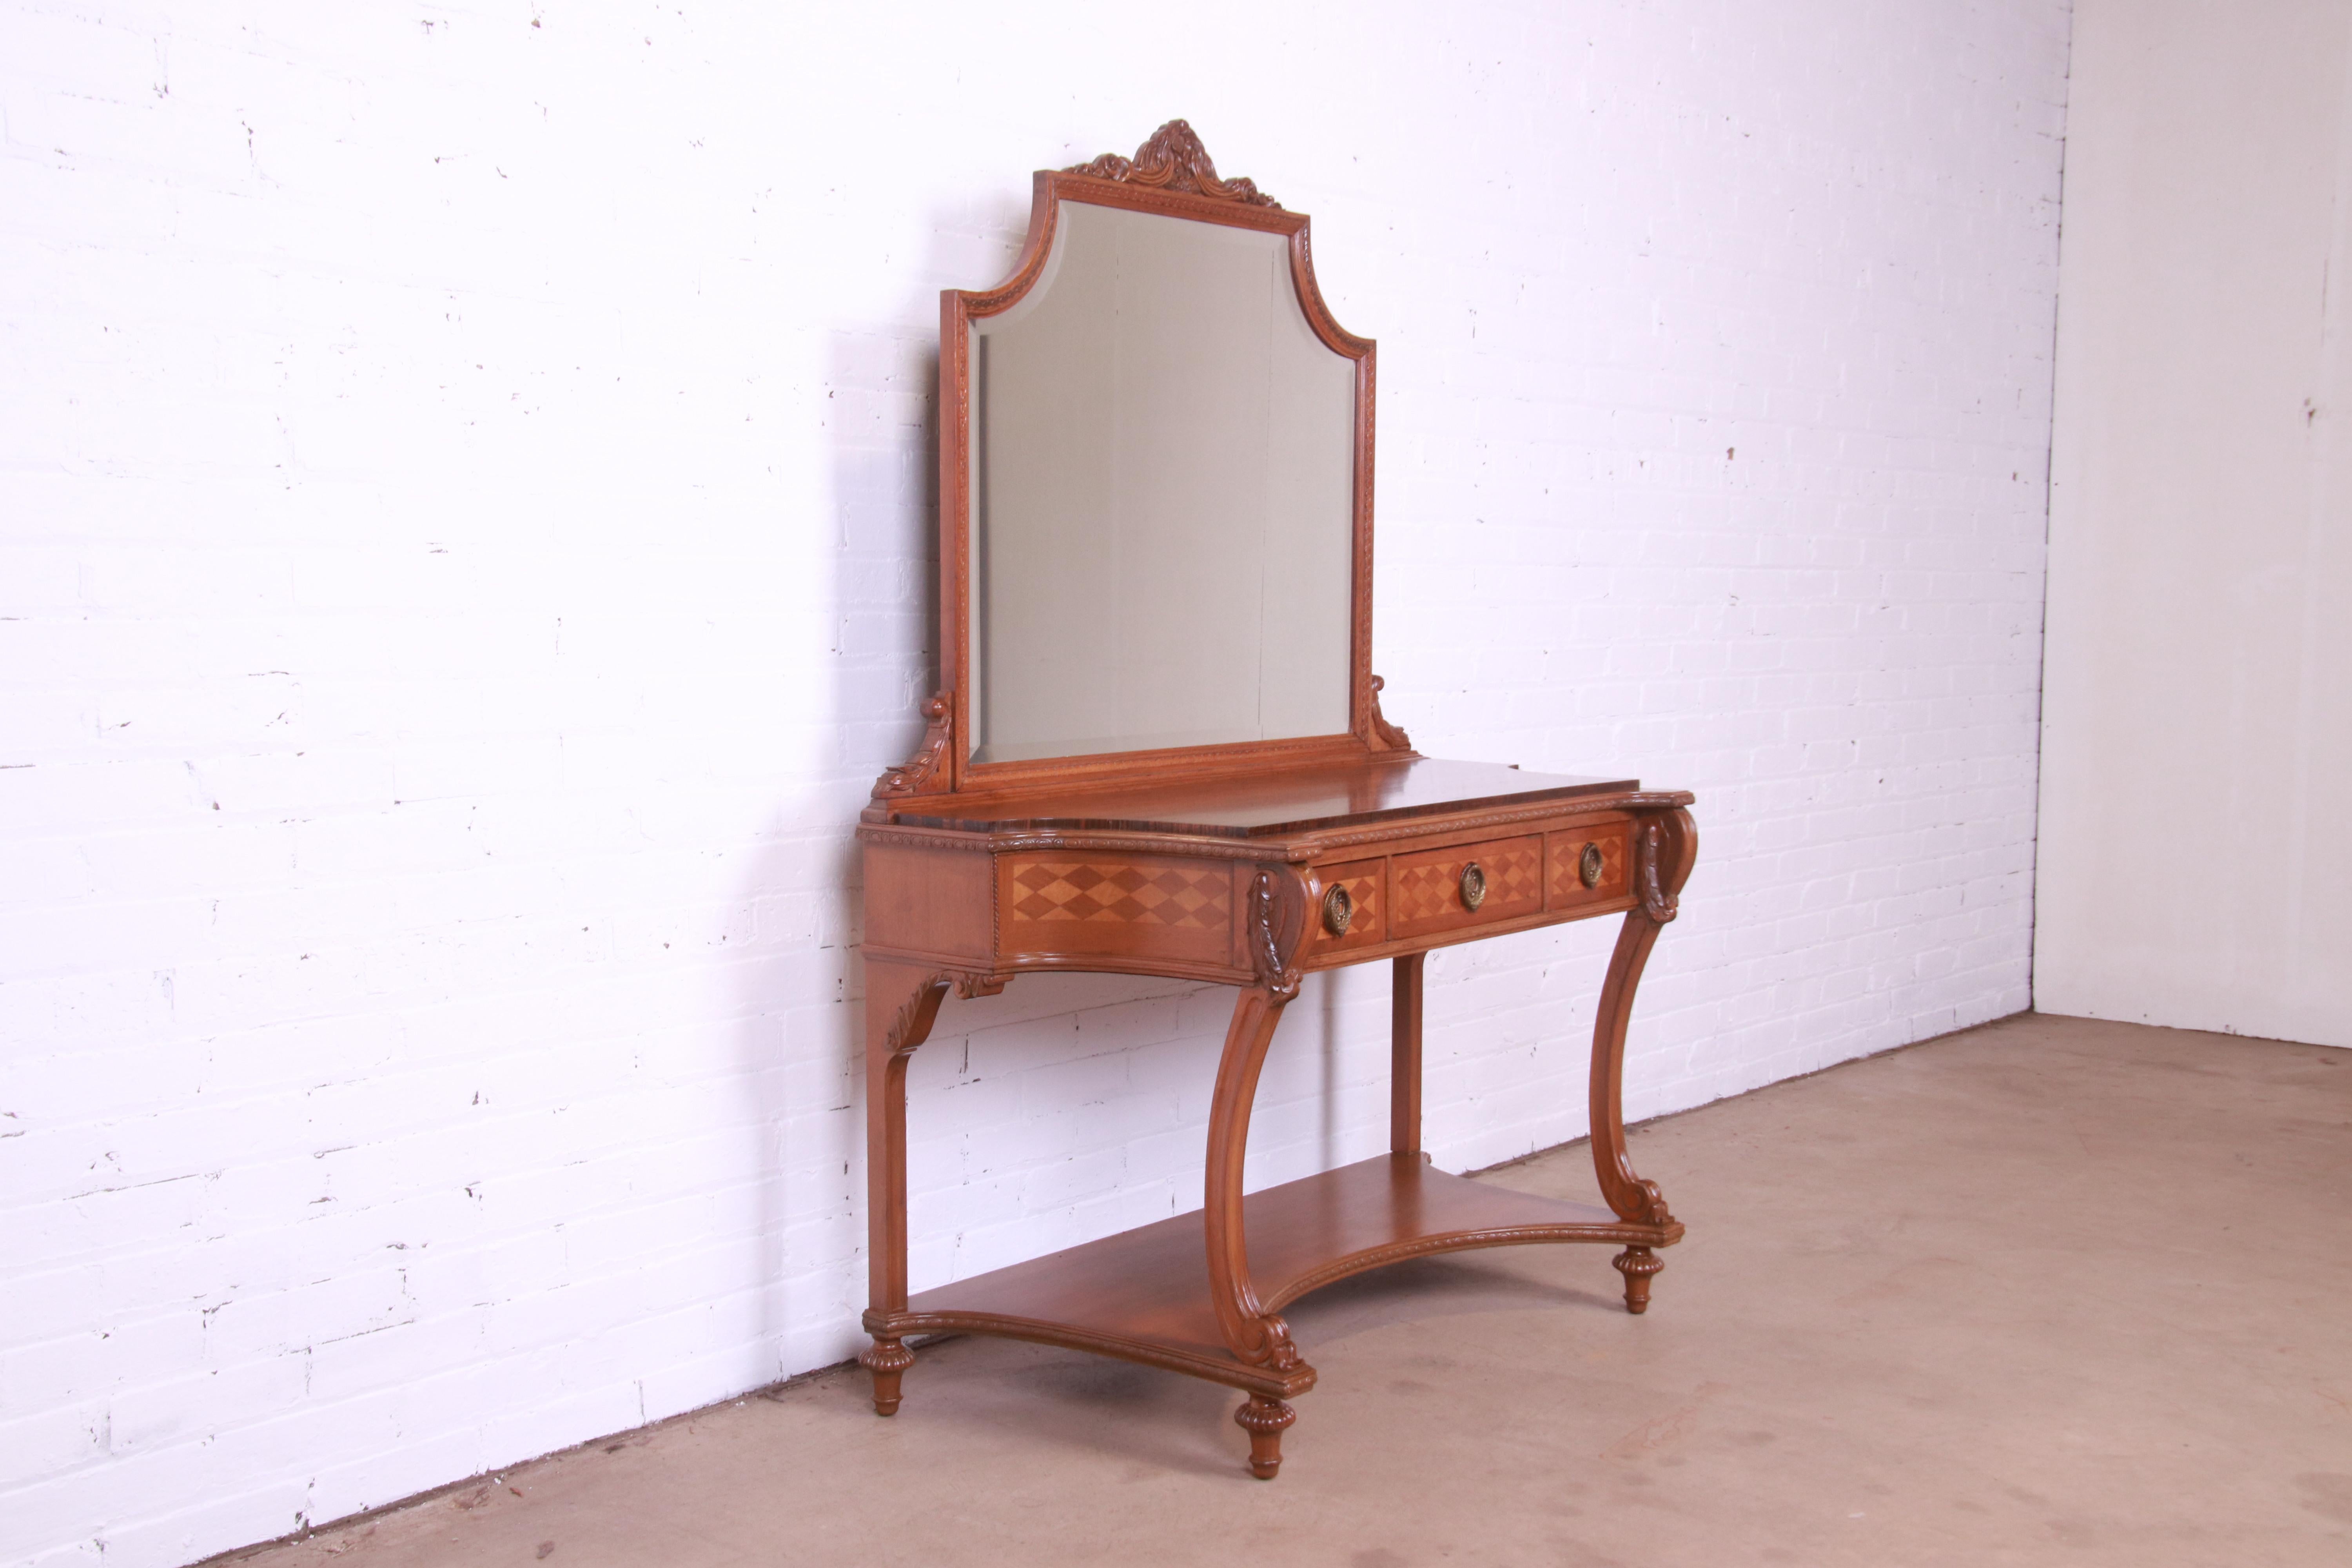 A rare and exceptional antique French Regency Louis XVI style vanity dresser with mirror

By Herman Miller, 